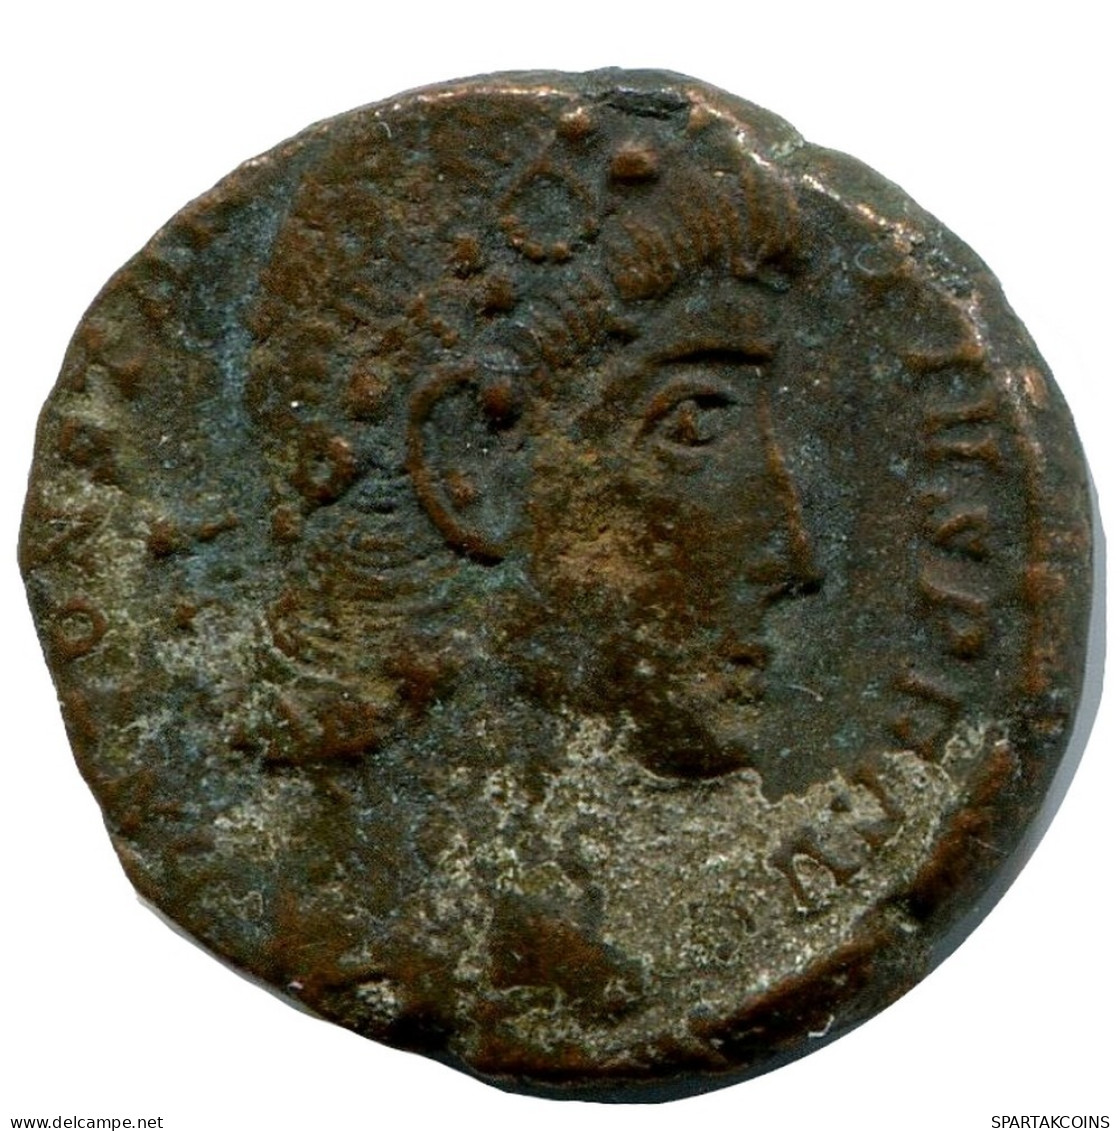 CONSTANTIUS II MINT UNCERTAIN FROM THE ROYAL ONTARIO MUSEUM #ANC10042.14.F.A - El Imperio Christiano (307 / 363)